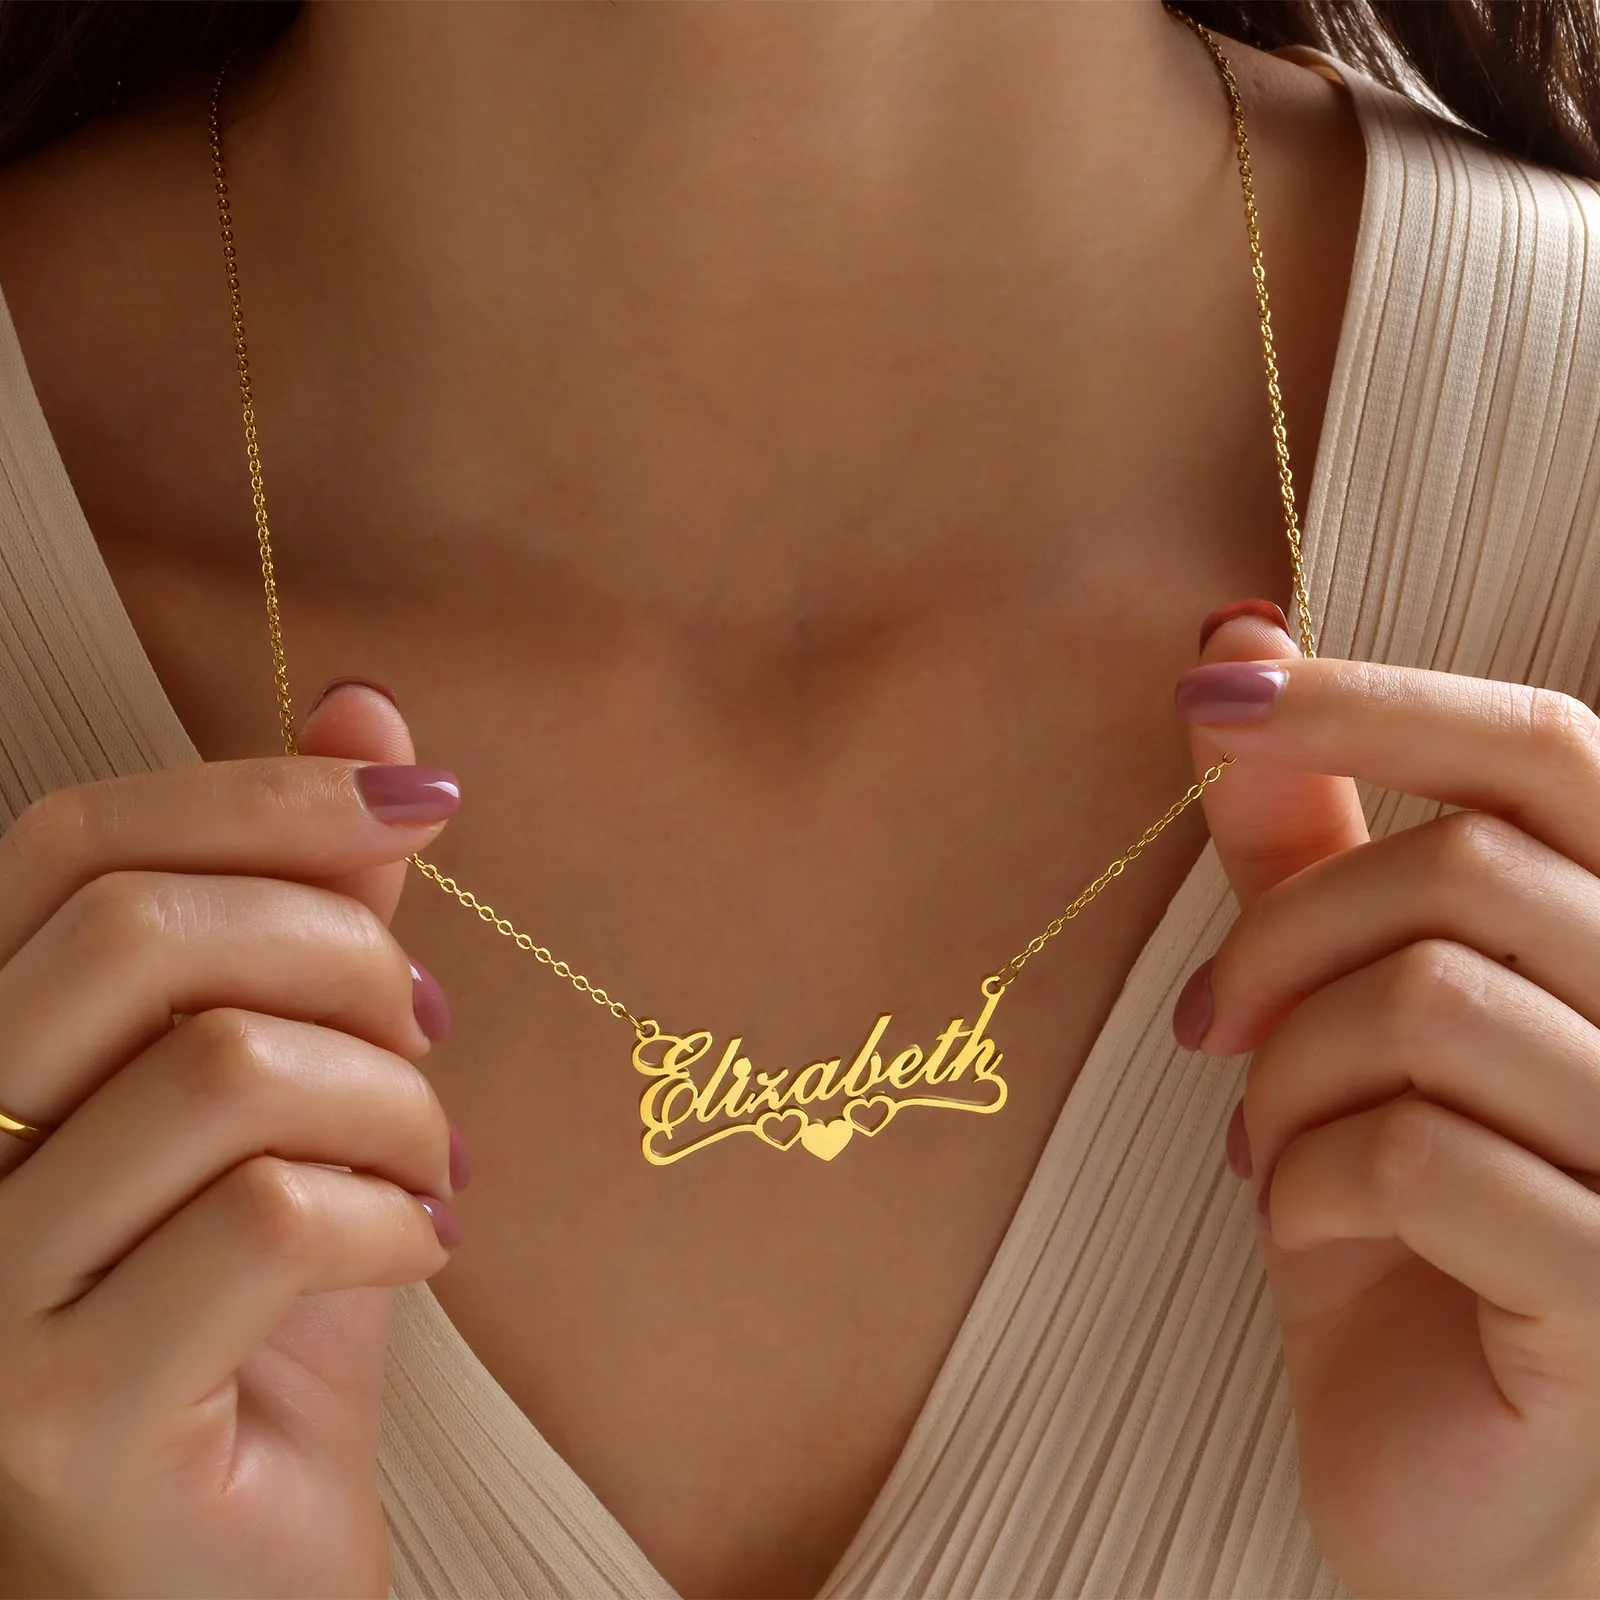 Vnox Custom Names Necklaces for Women Girls, Gold Color Stainless Steel Personalized Heart Love Pendant Collar,Gifts for Her